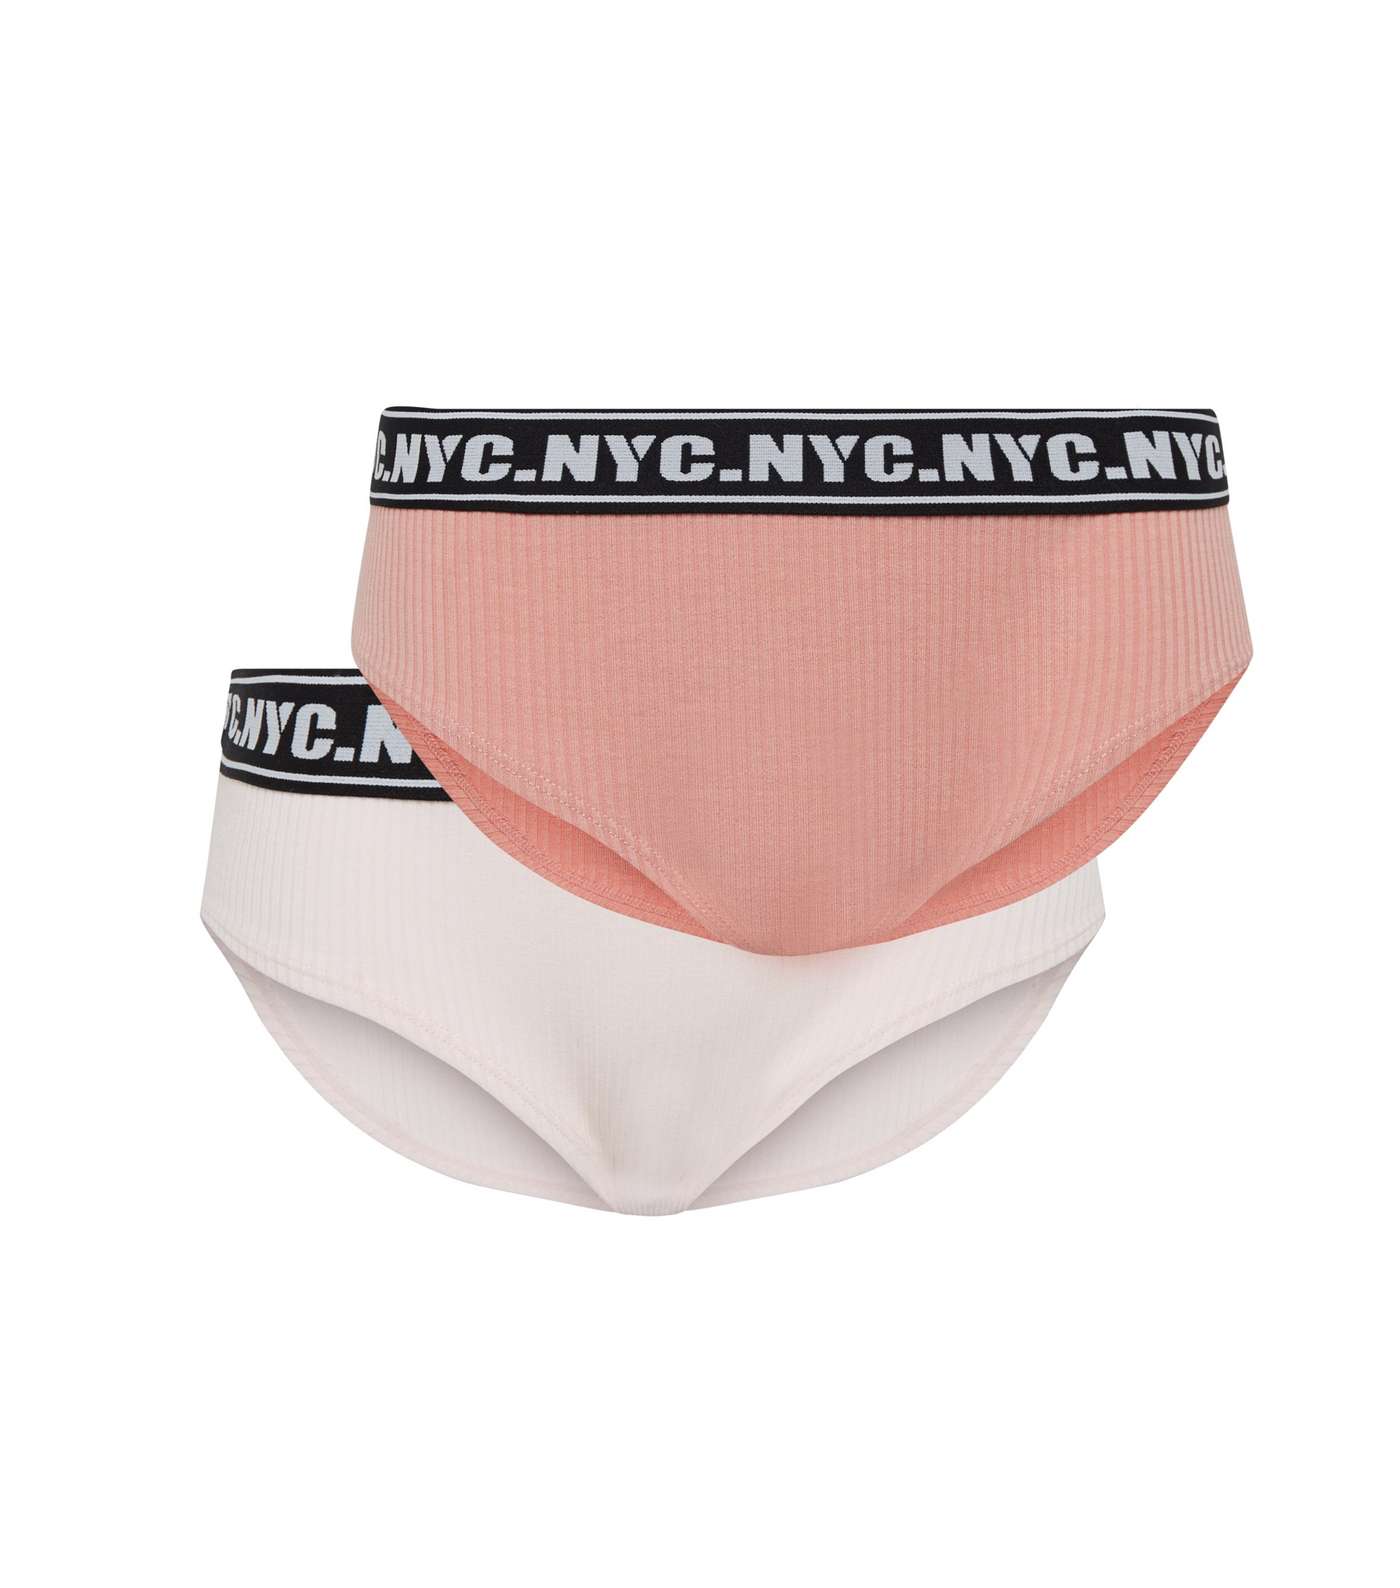 Girls 2 Pack Pink and Cream NYC Short Briefs